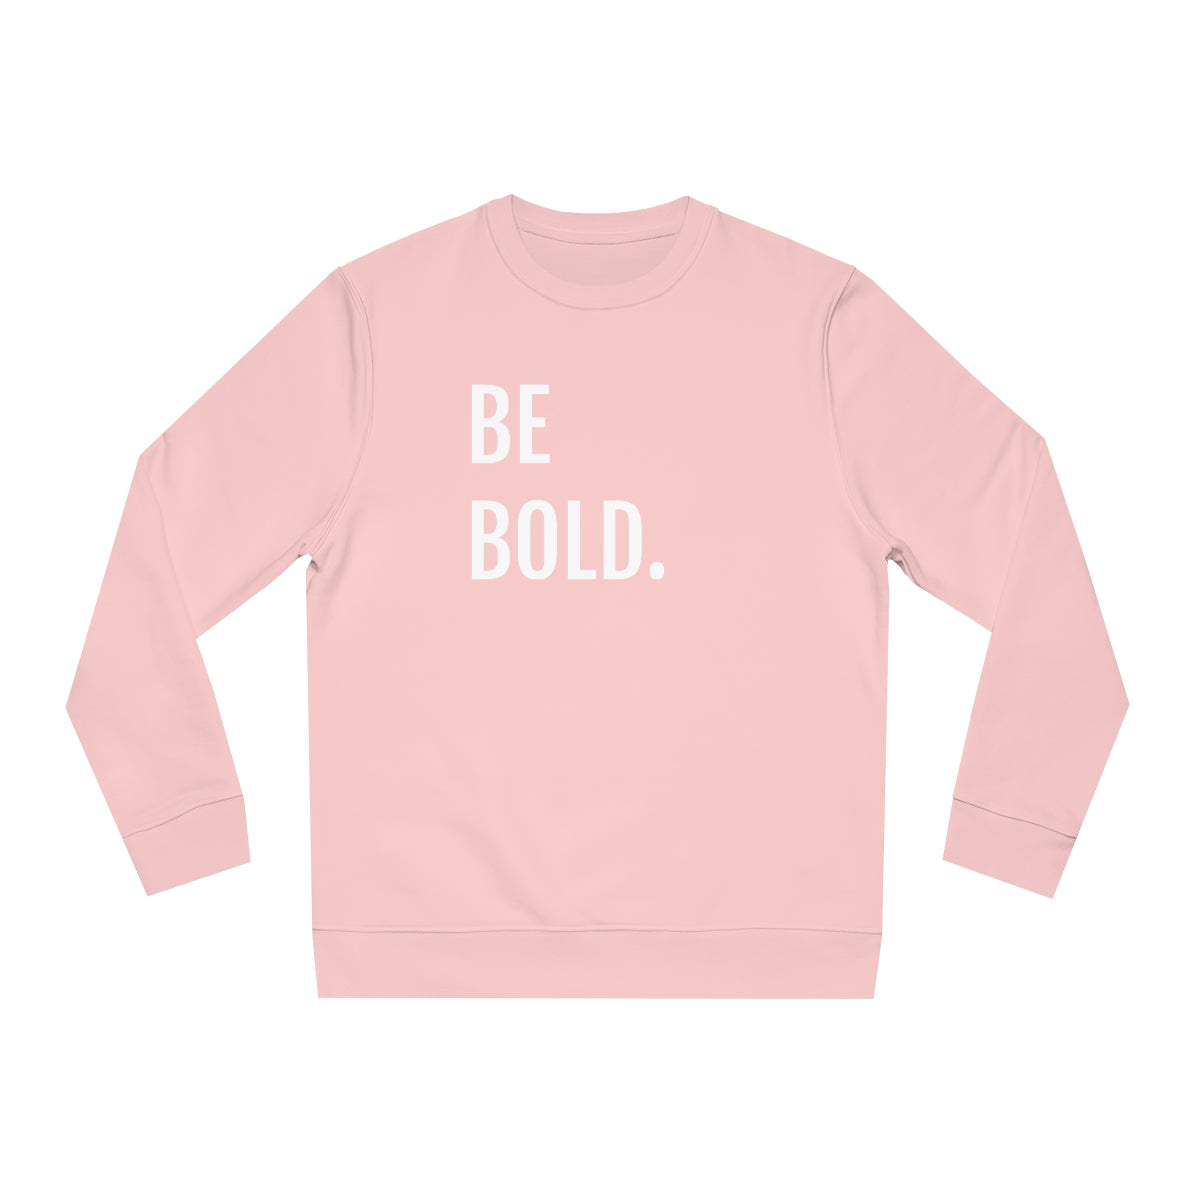 BE BOLD.